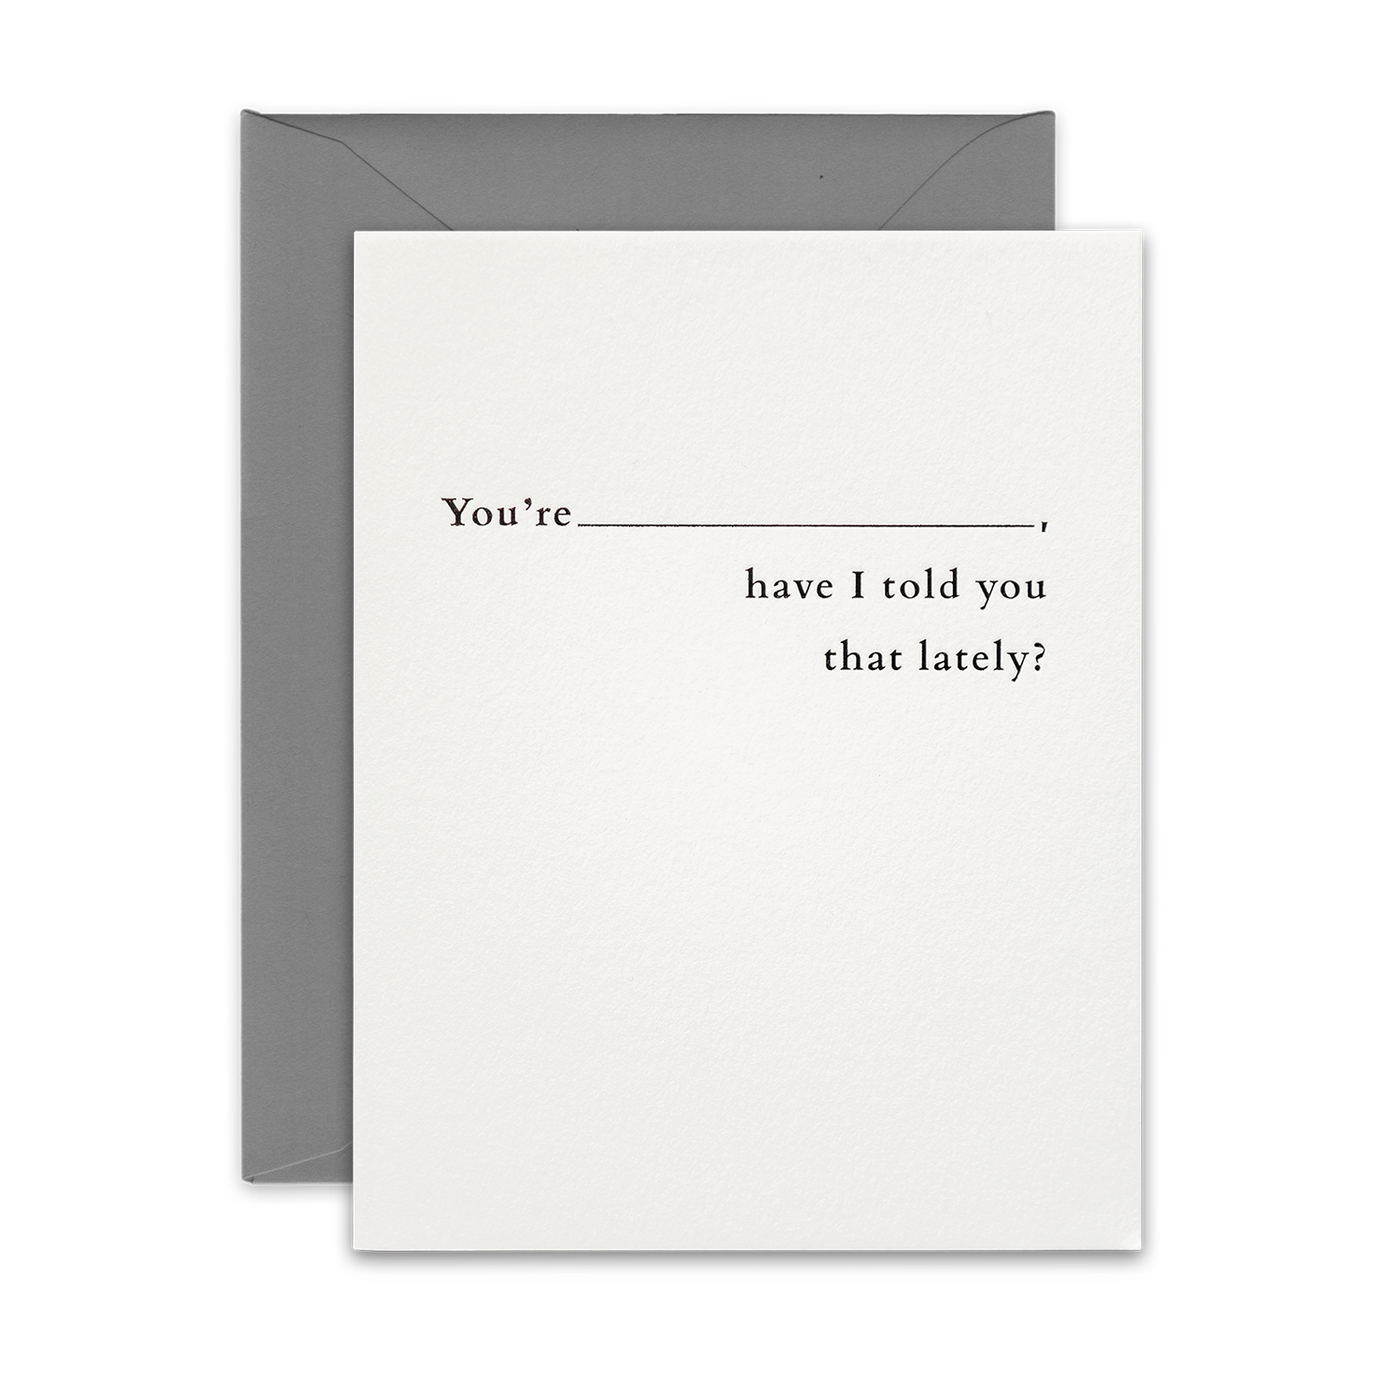 Black foil letterpress greeting card by beknown. You're (blank), have I told you that lately?